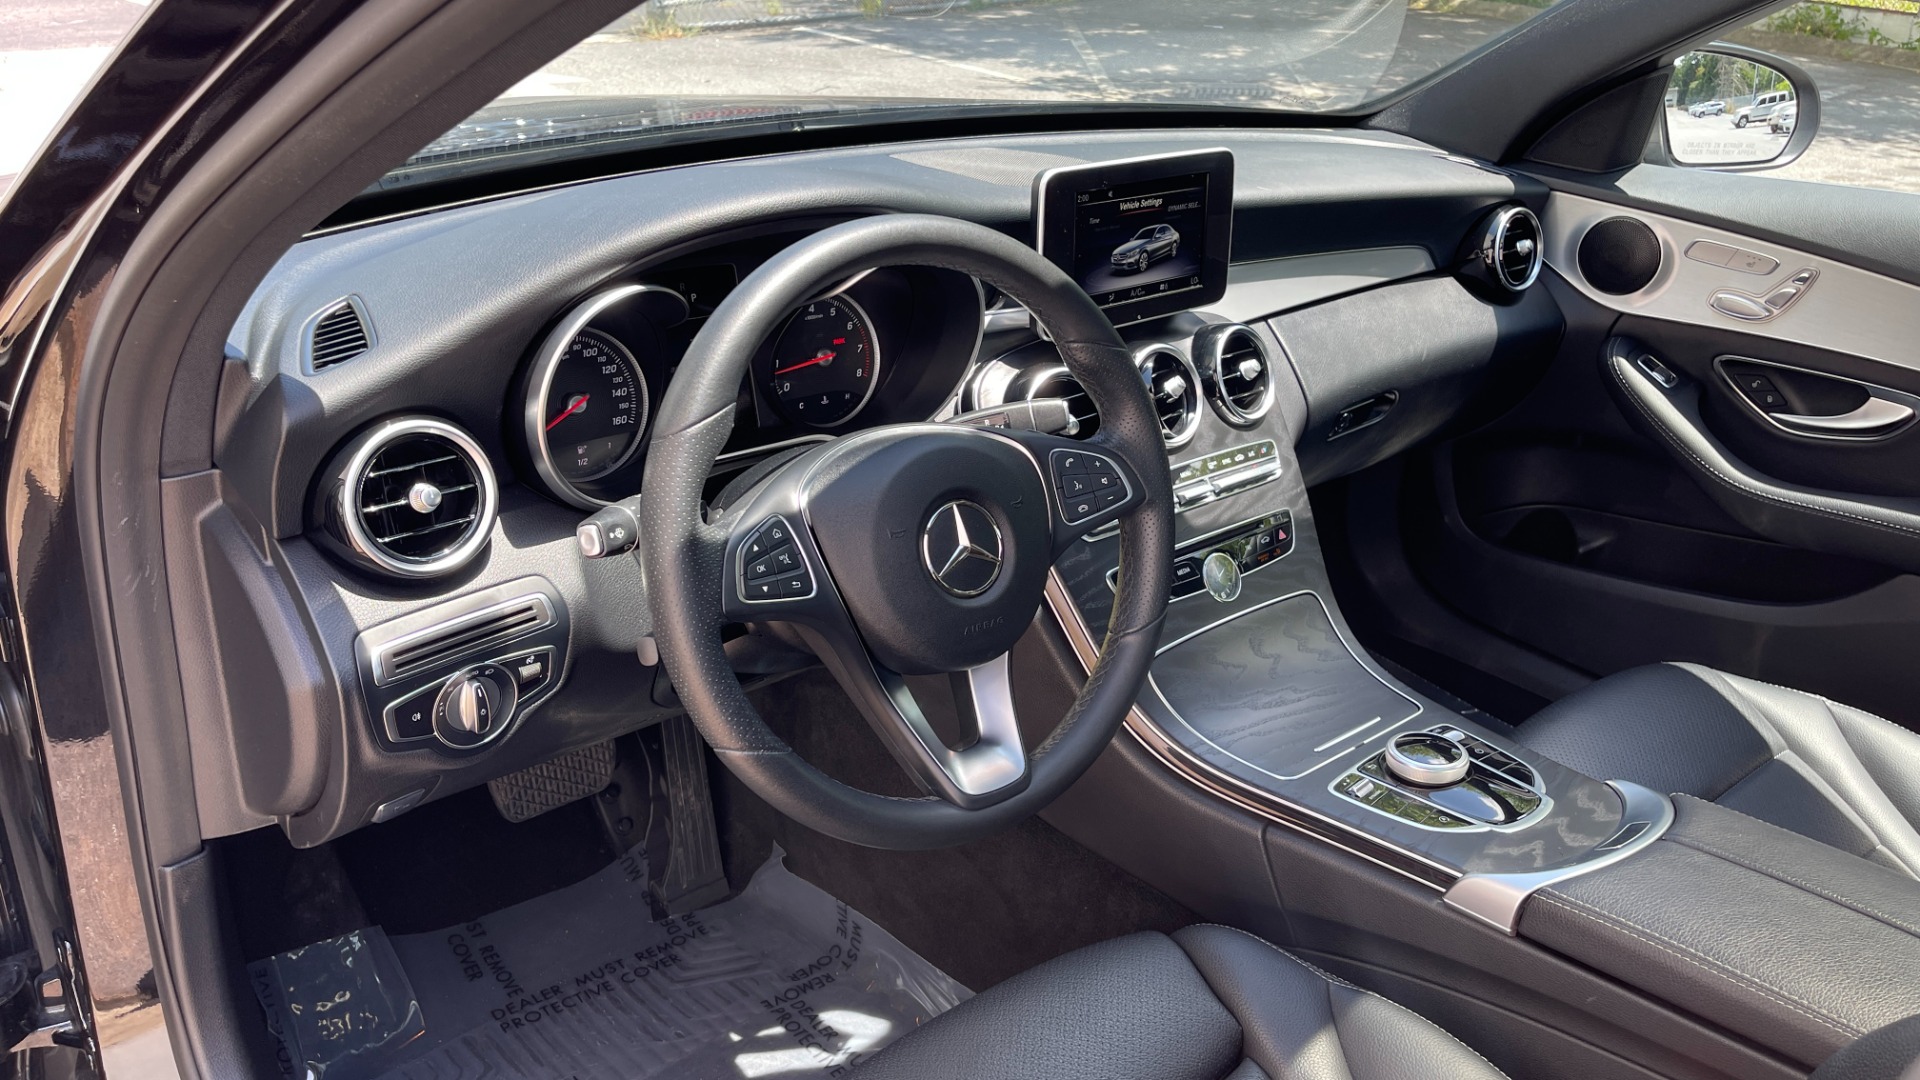 Used 2018 Mercedes-Benz C-Class C 300 / PREMIUM / REVIEW CAM / HTD SEATS / 18IN WHEELS for sale $31,295 at Formula Imports in Charlotte NC 28227 8